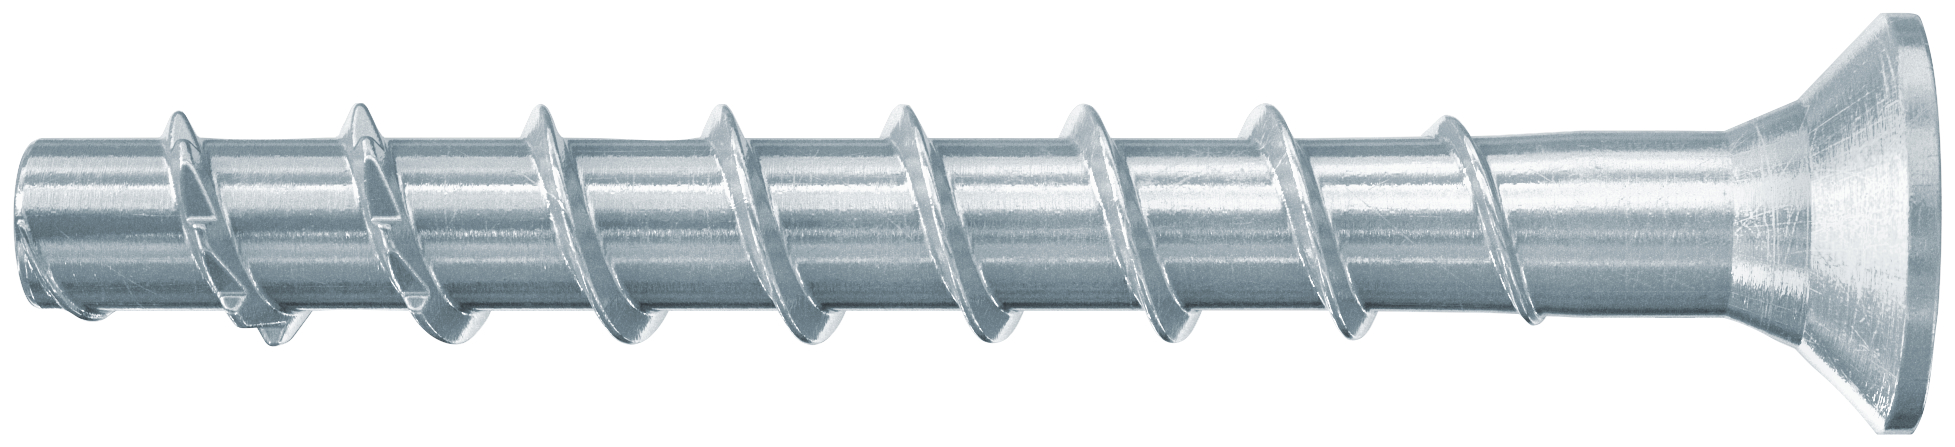 Concrete anchoring screw countersunk type SK Ultracut Carbon steel, hardened Horganyzott